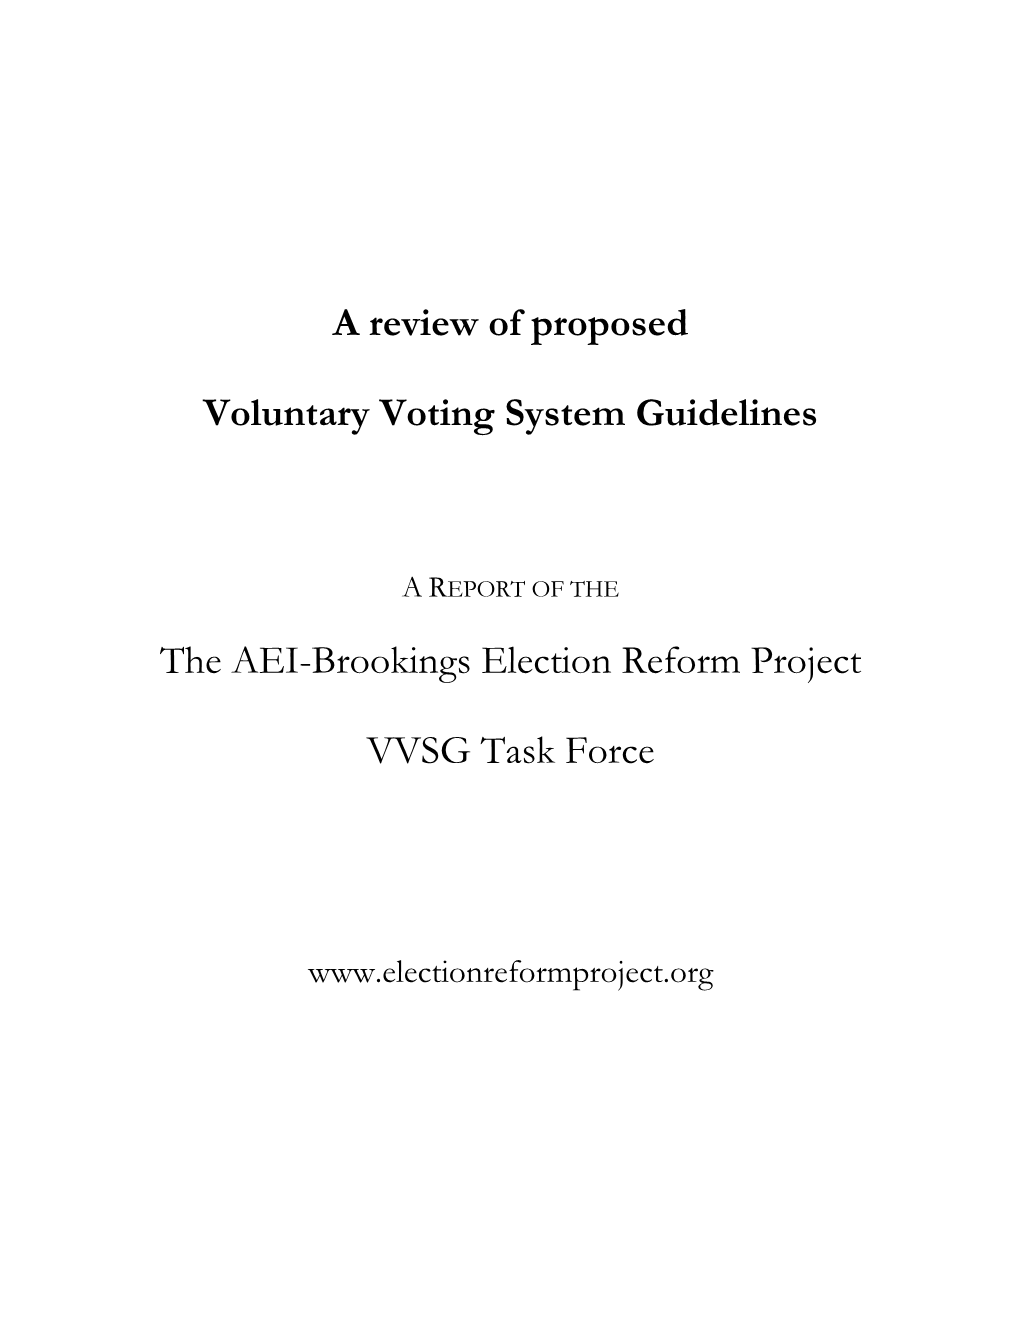 The AEI-Brookings Election Reform Project VVSG Task Force